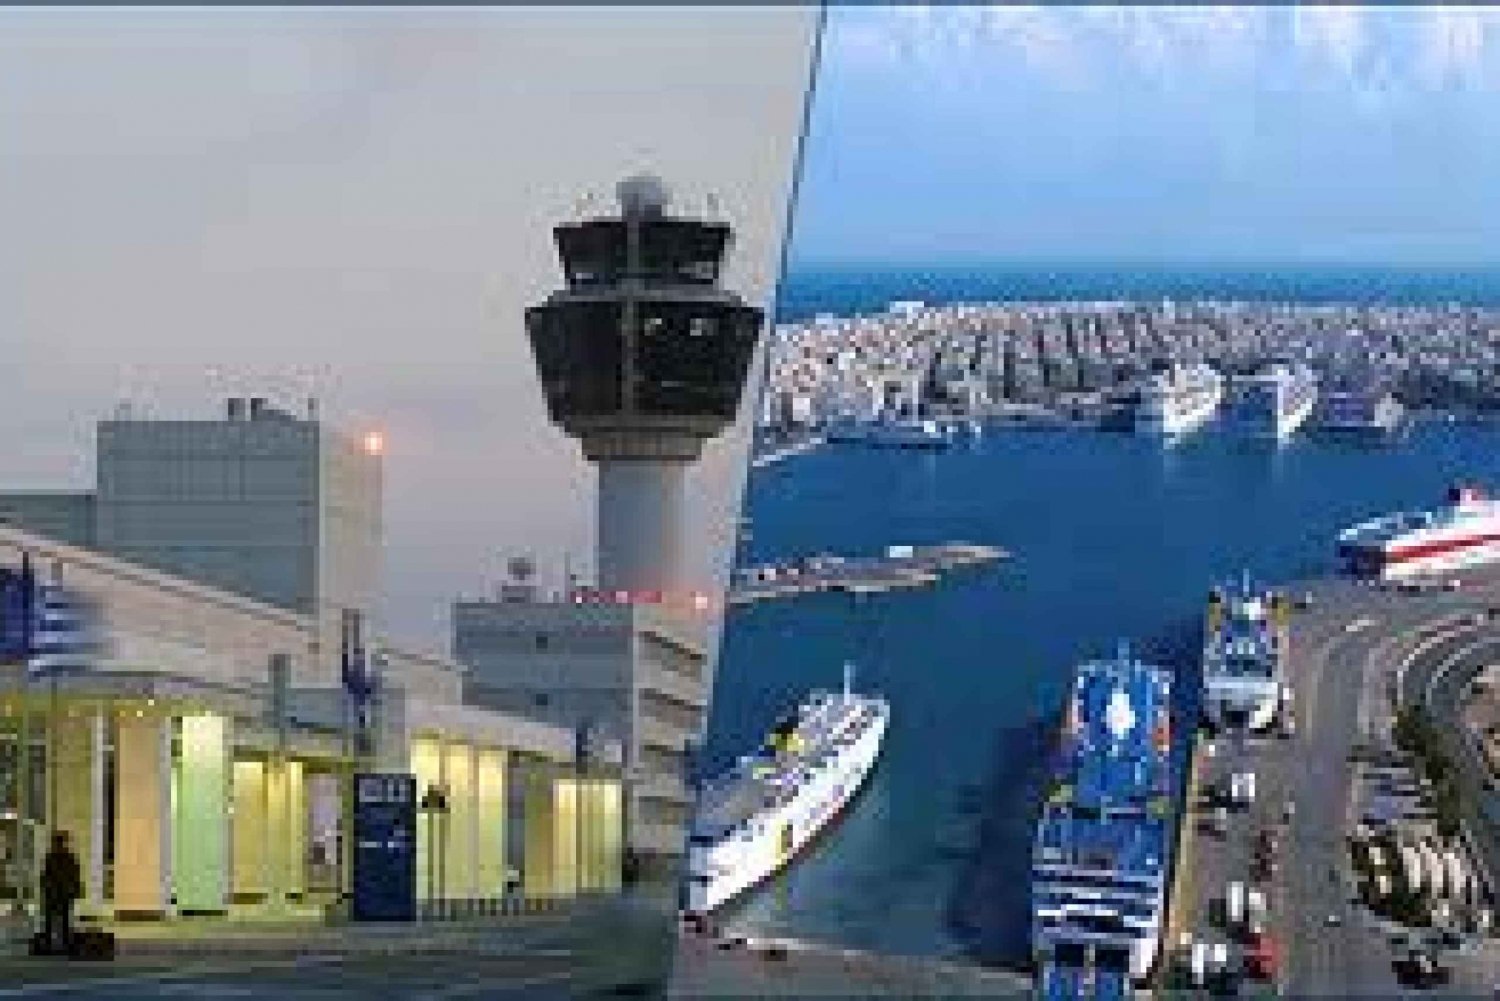 Private Transfer from/to Athens Airport and Piraeus Port